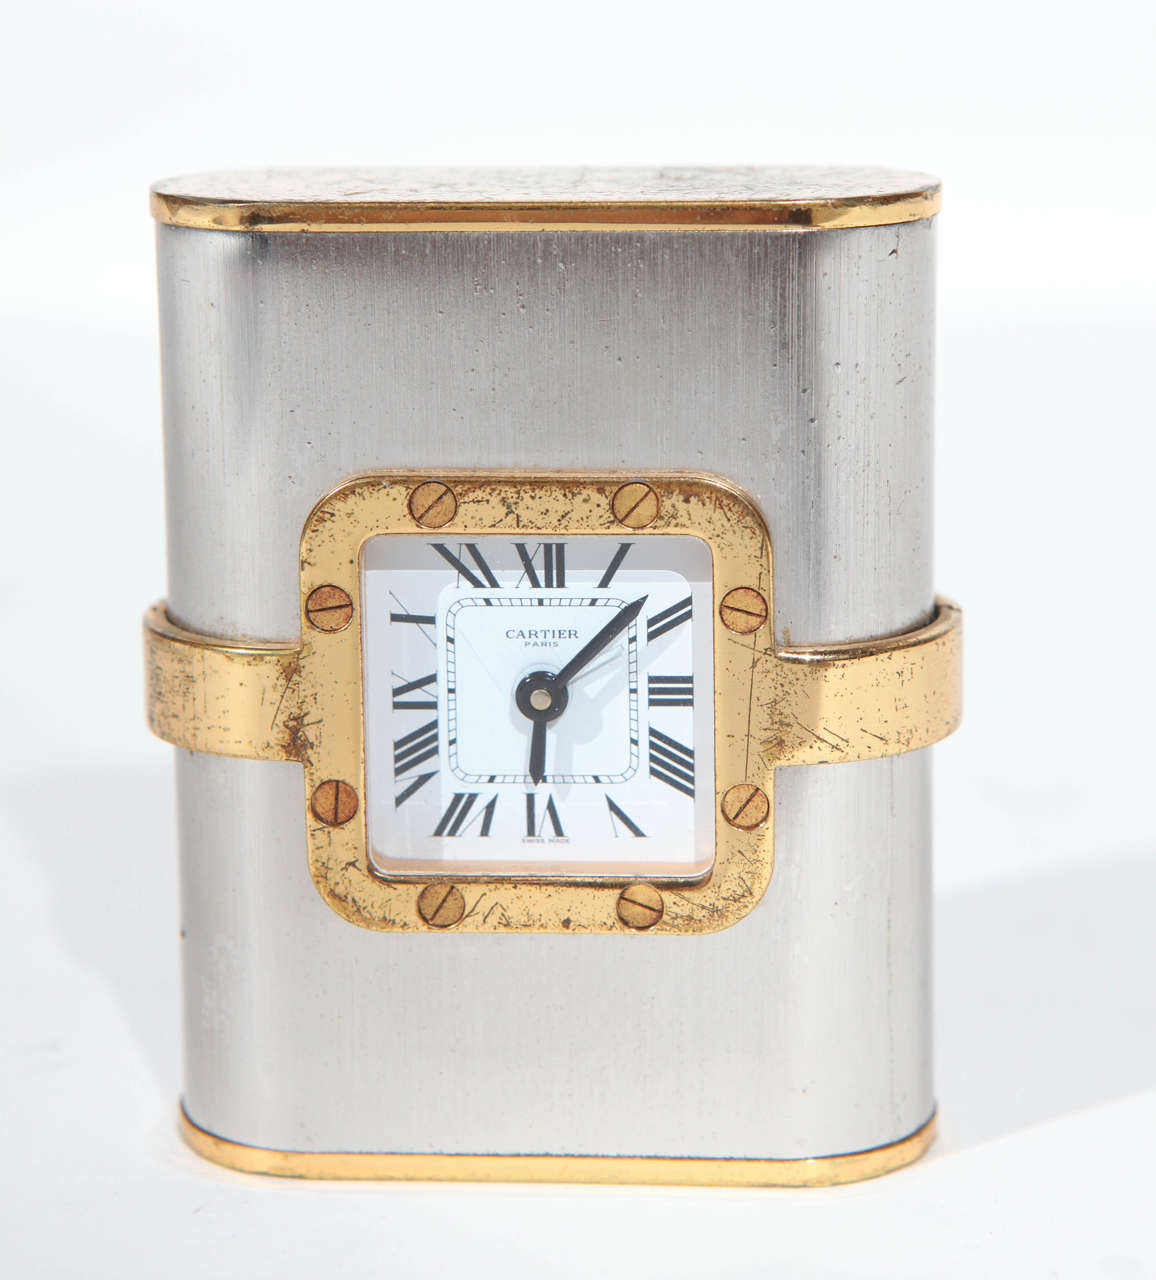 A vintage French Cartier clock. Made of gold plated metal and brushed steel. Has French markings on the base. Note that there are some scratches and oxidation on the gold plating.